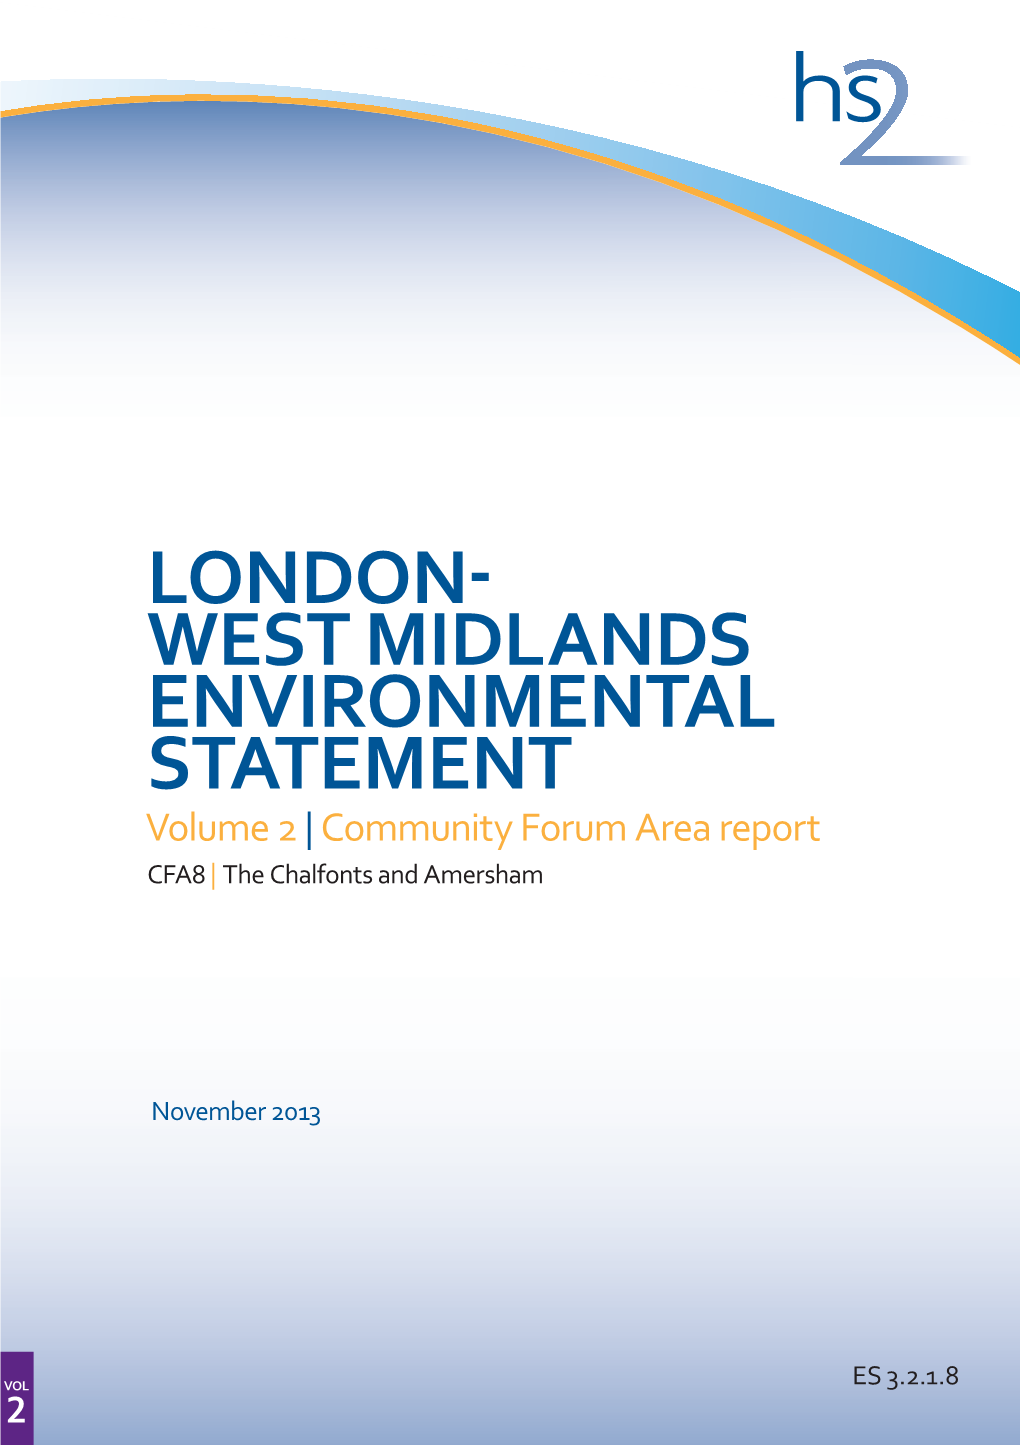 London- West Midlands ENVIRONMENTAL STATEMENT Volume 2 | Community Forum Area Report CFA8 | the Chalfonts and Amersham